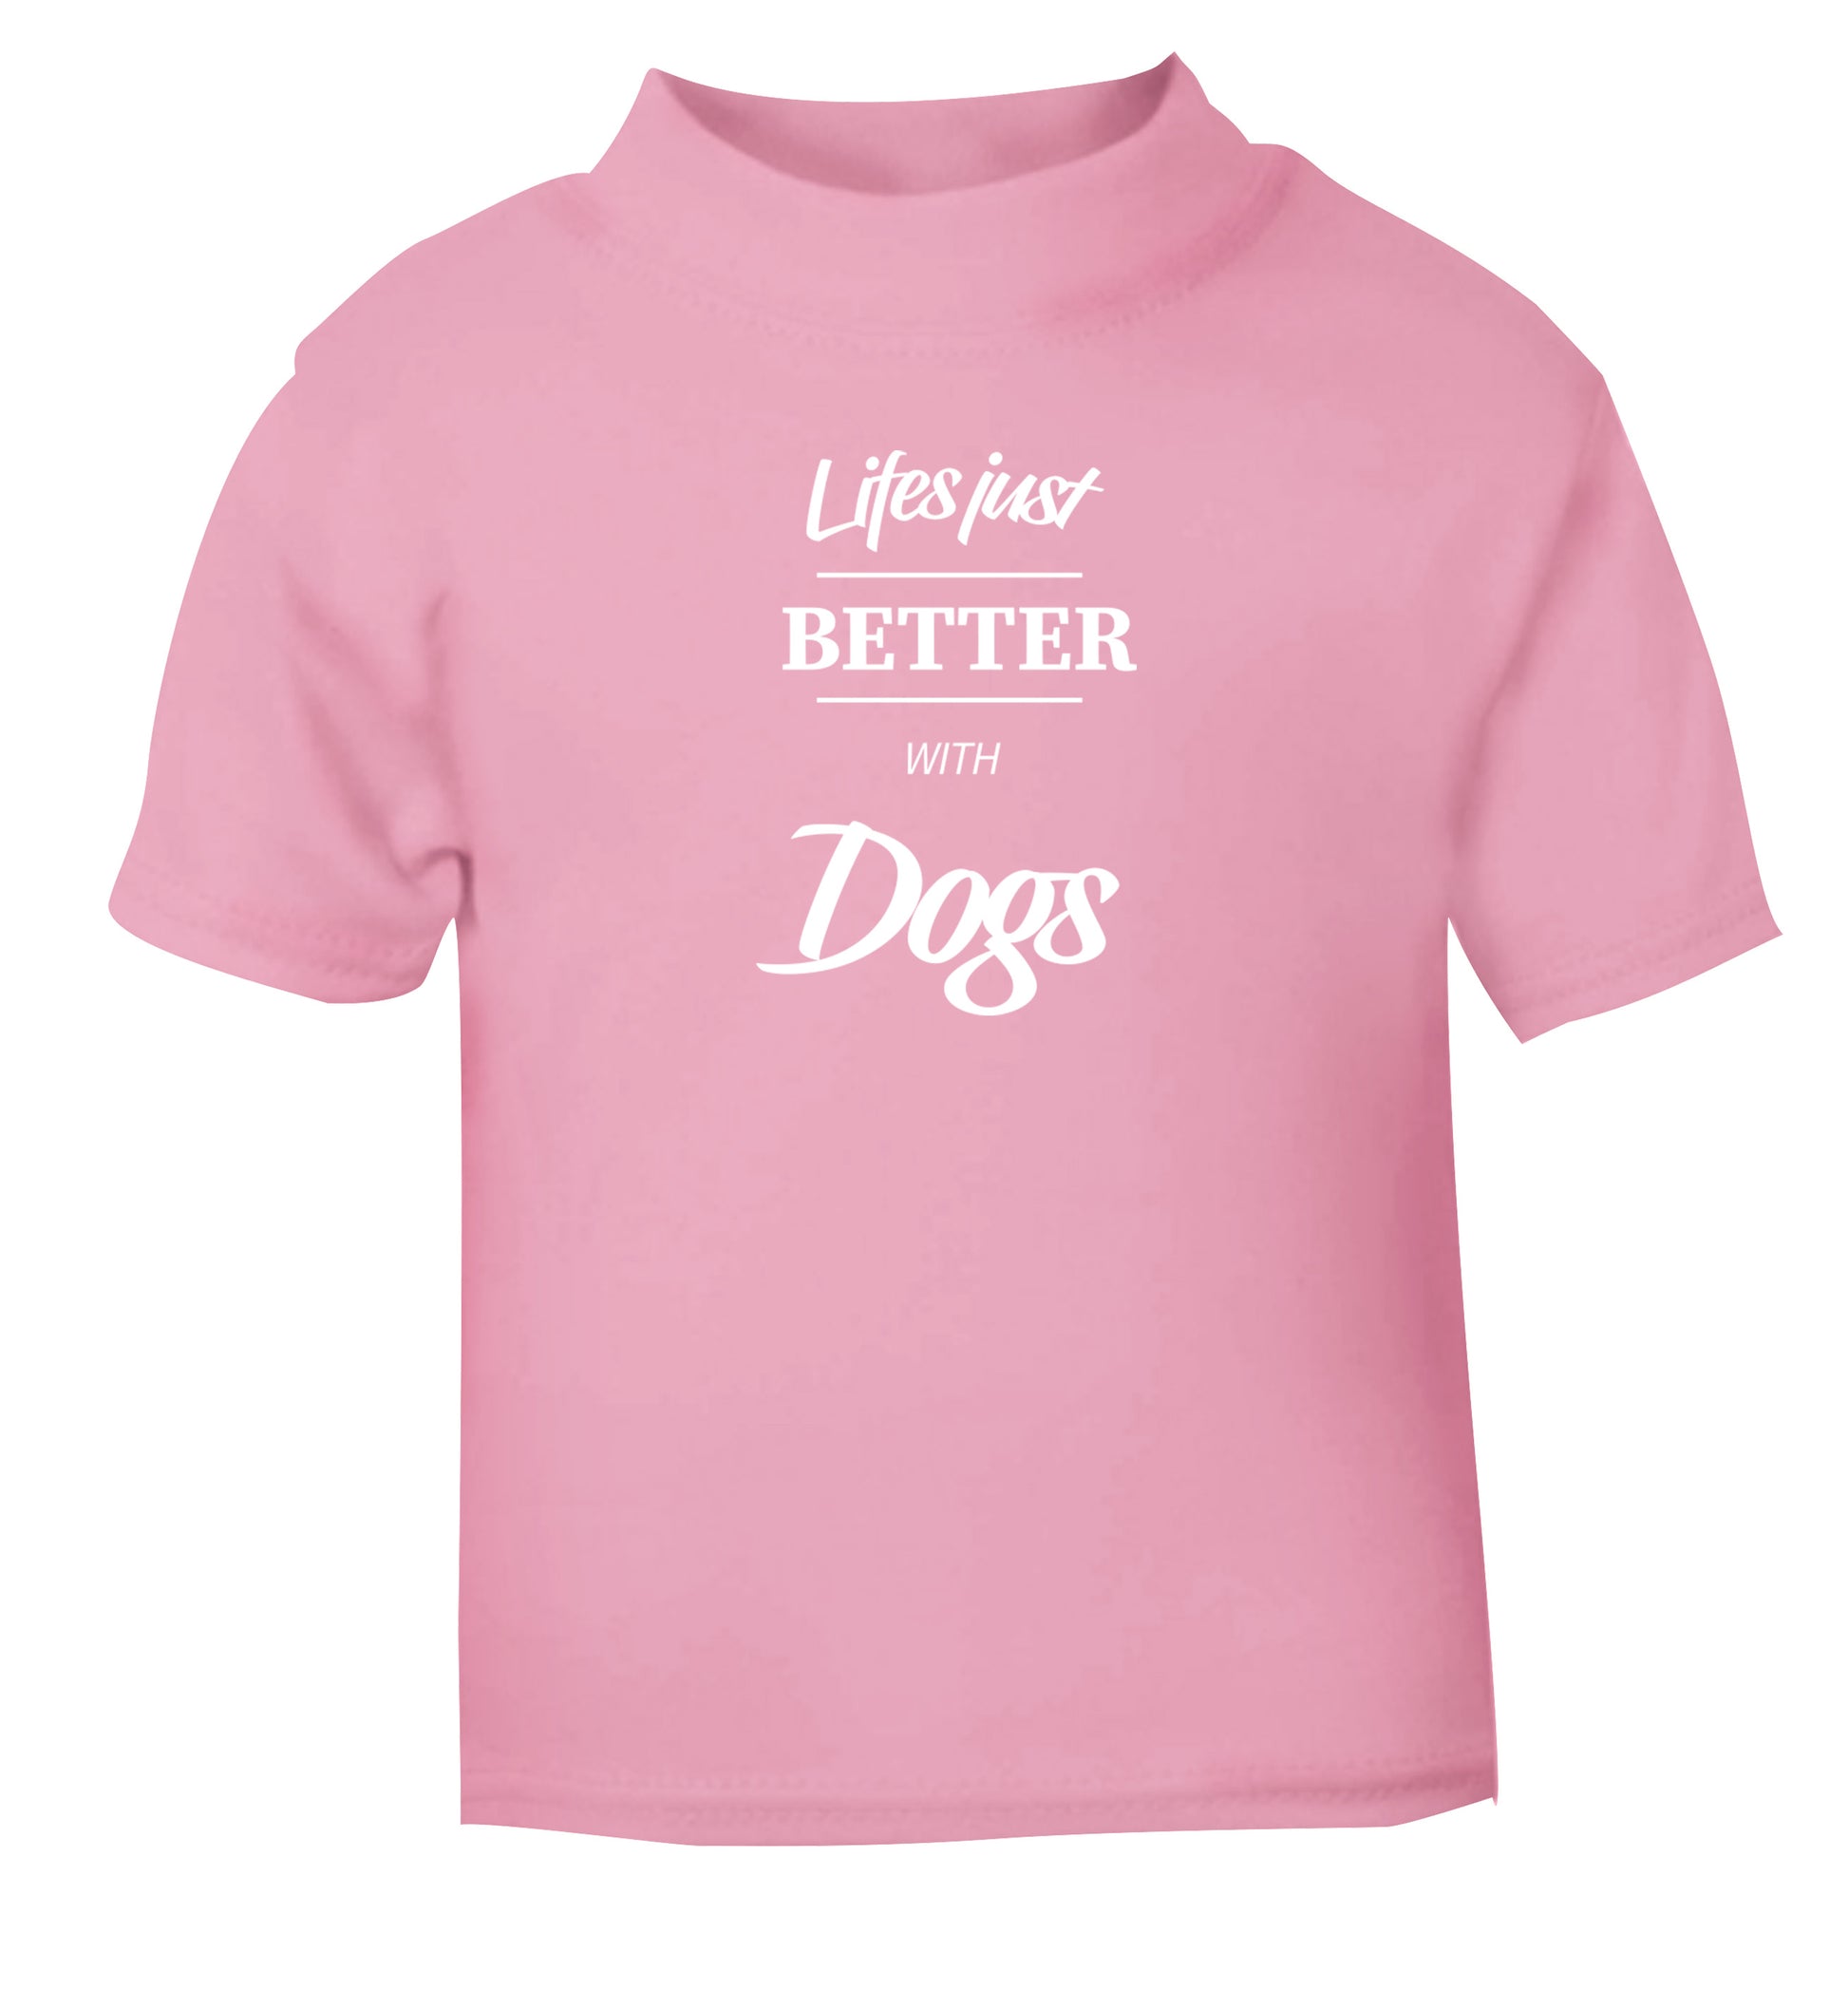 life is better with dogs light pink Baby Toddler Tshirt 2 Years